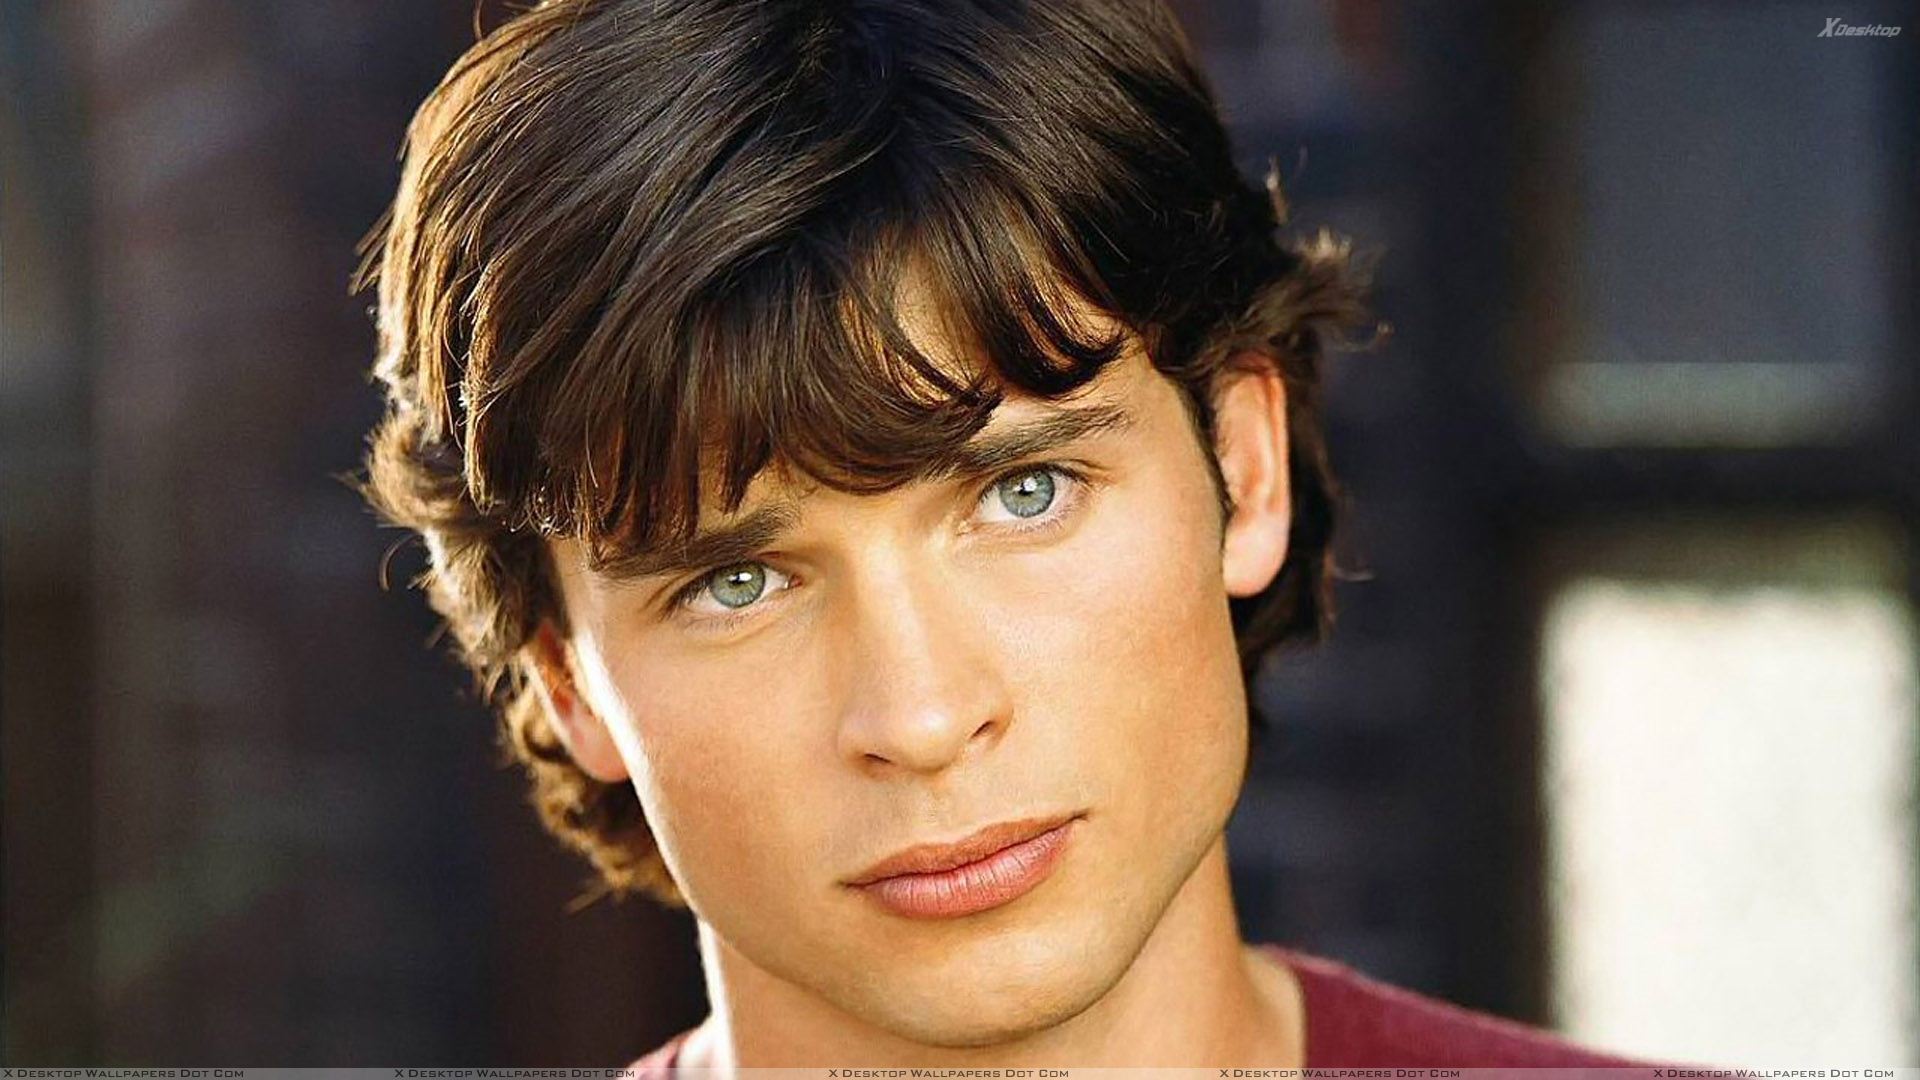 5. "Hollywood's Hottest Dark Haired and Blue Eyed Actors on IMDb" - wide 3